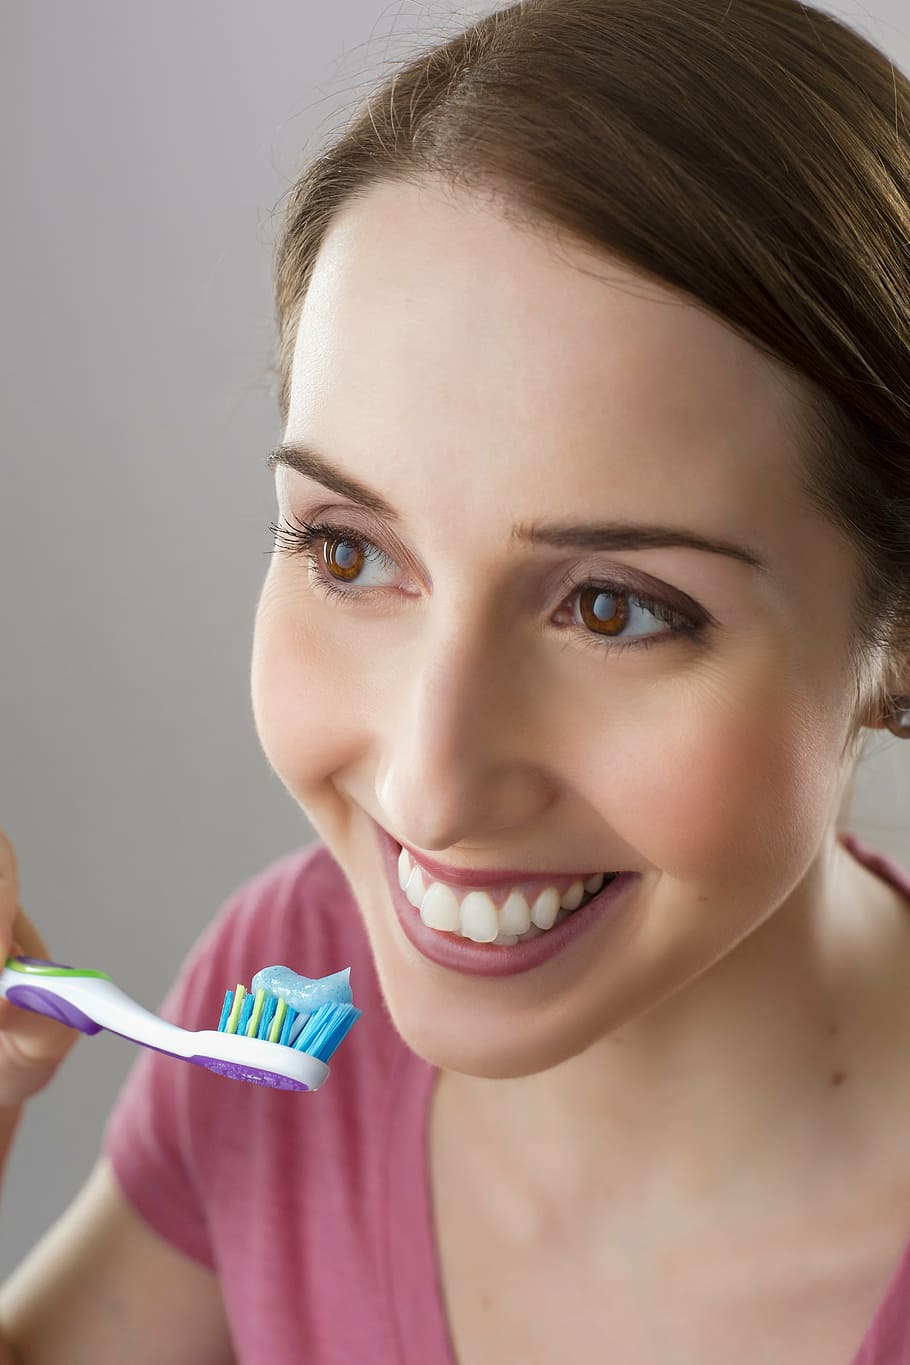 woman, holding, toothbrush, smiling, dentist, tooth, smile, hygiene, one woman only, dental health